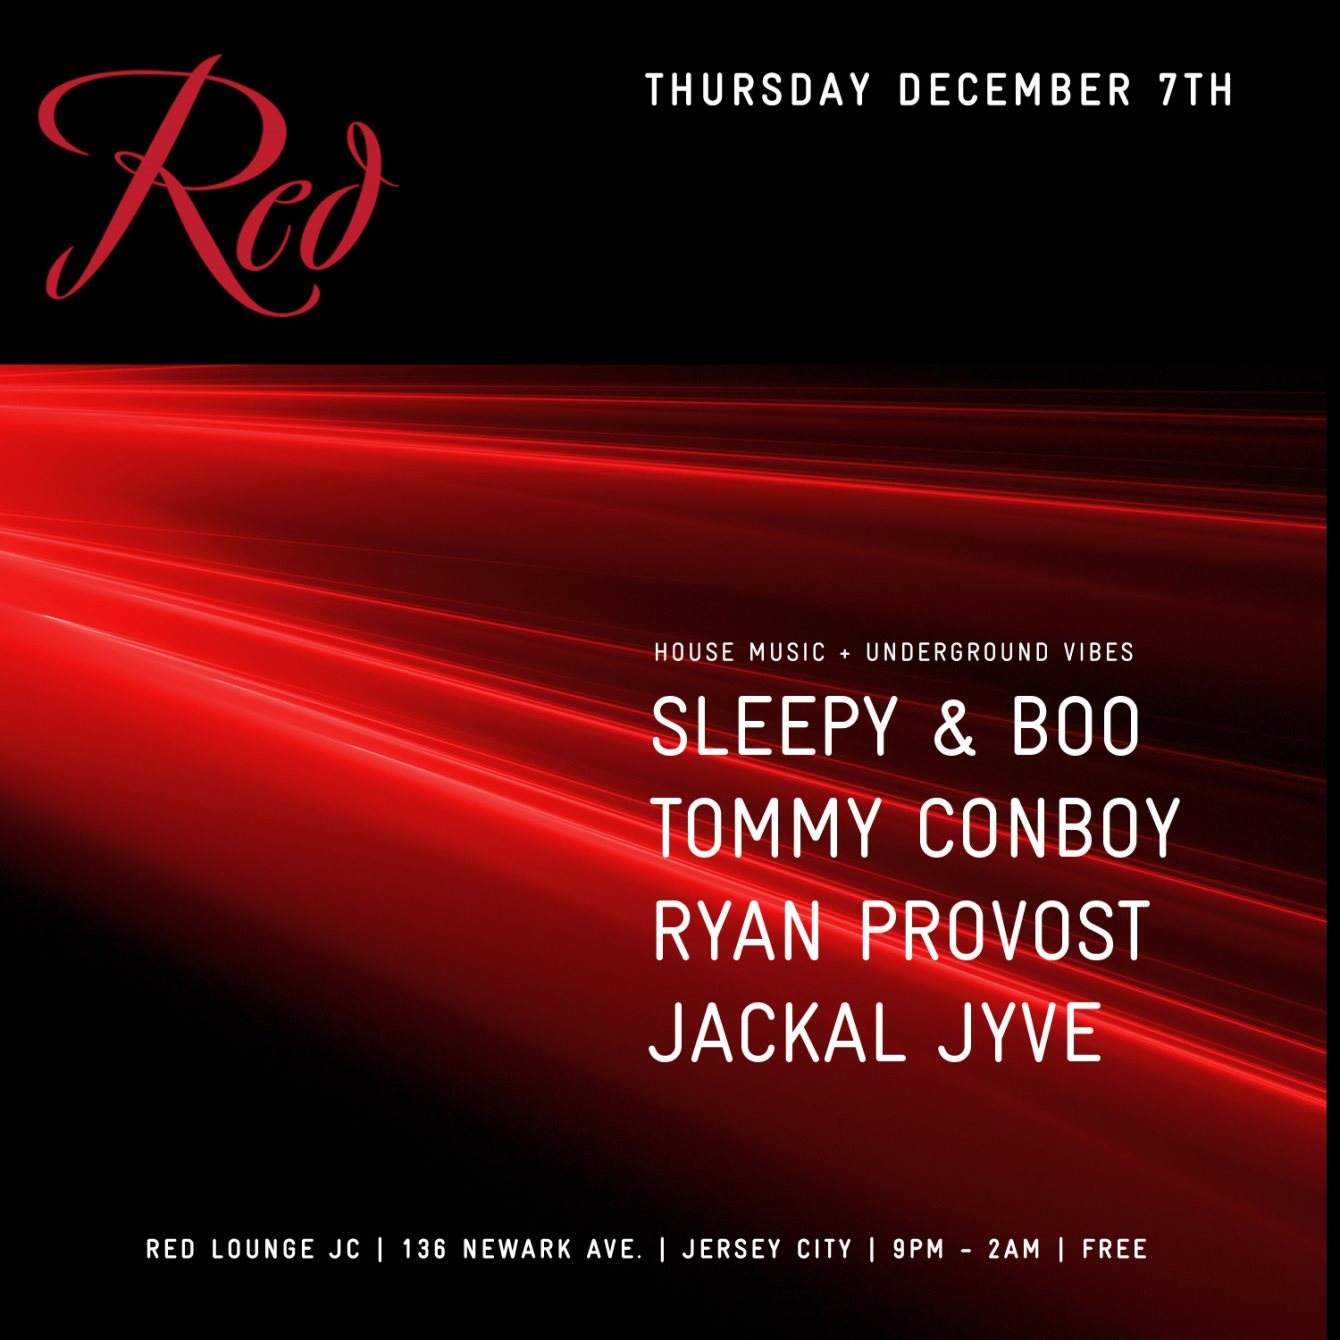 Red - Sleepy & Boo, Tommy Conboy, Ryan Provost, Jackal Jyve - フライヤー表